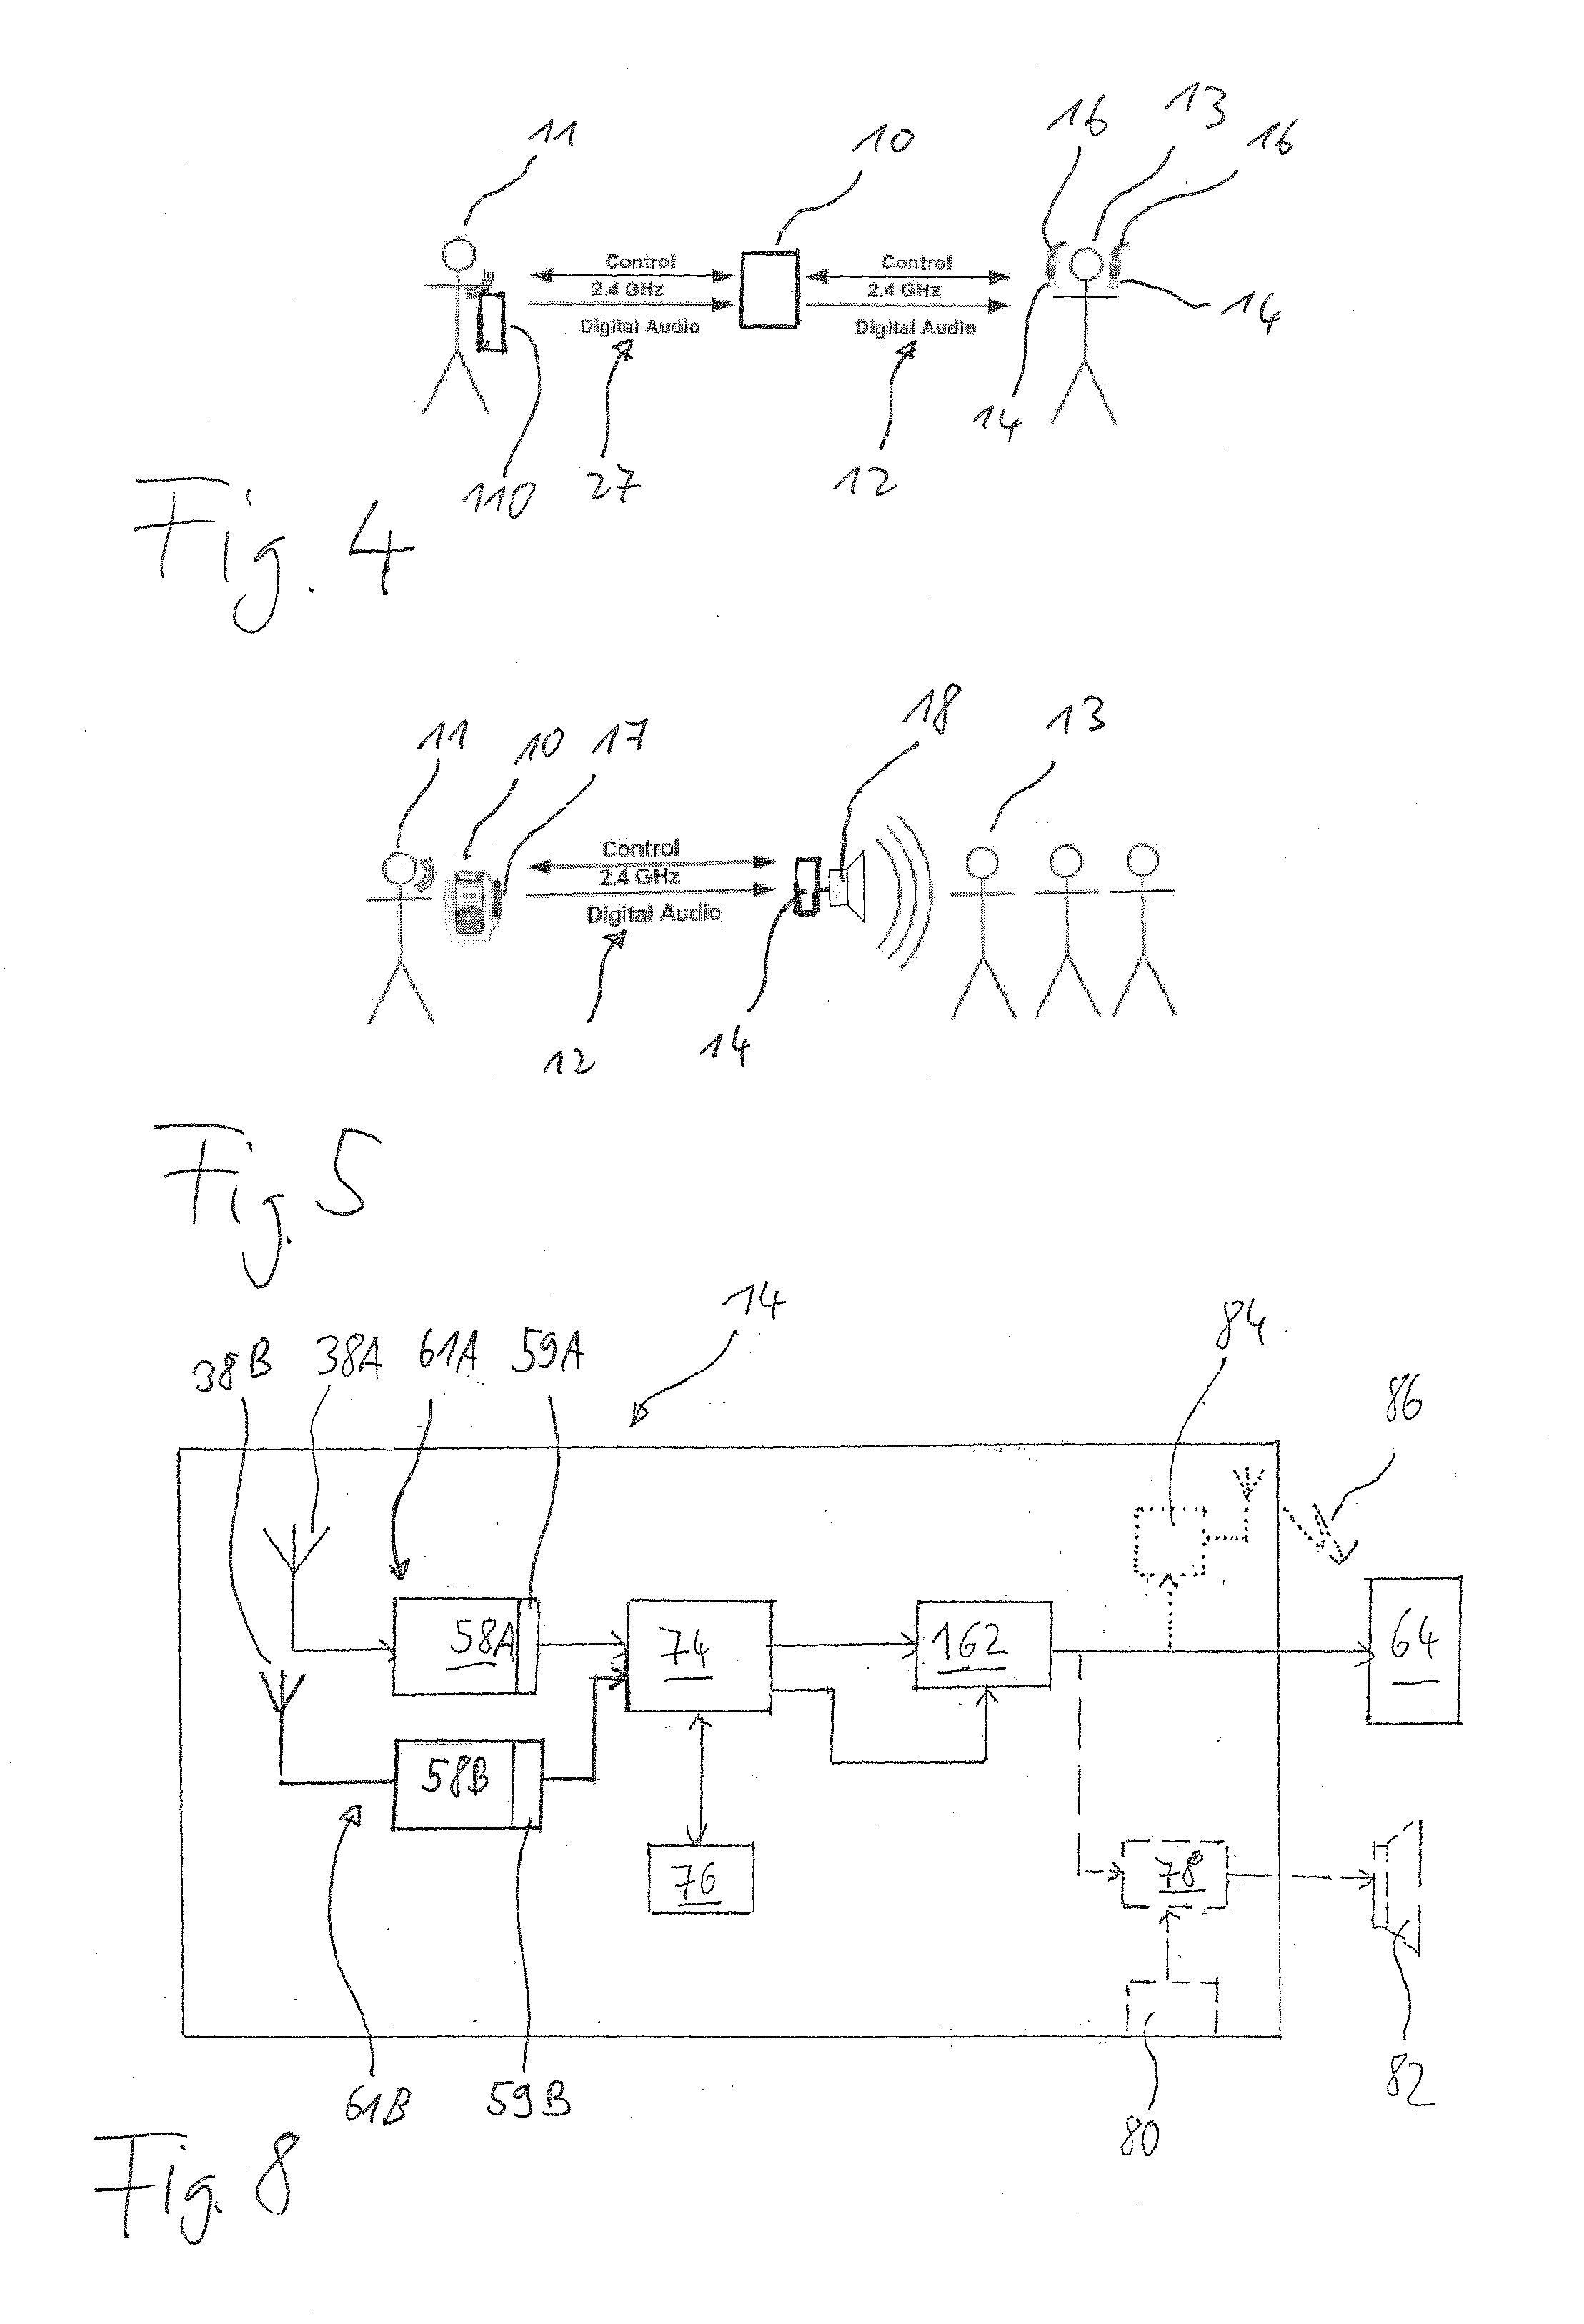 Wireless sound transmission system and method using improved frequency hopping and power saving mode